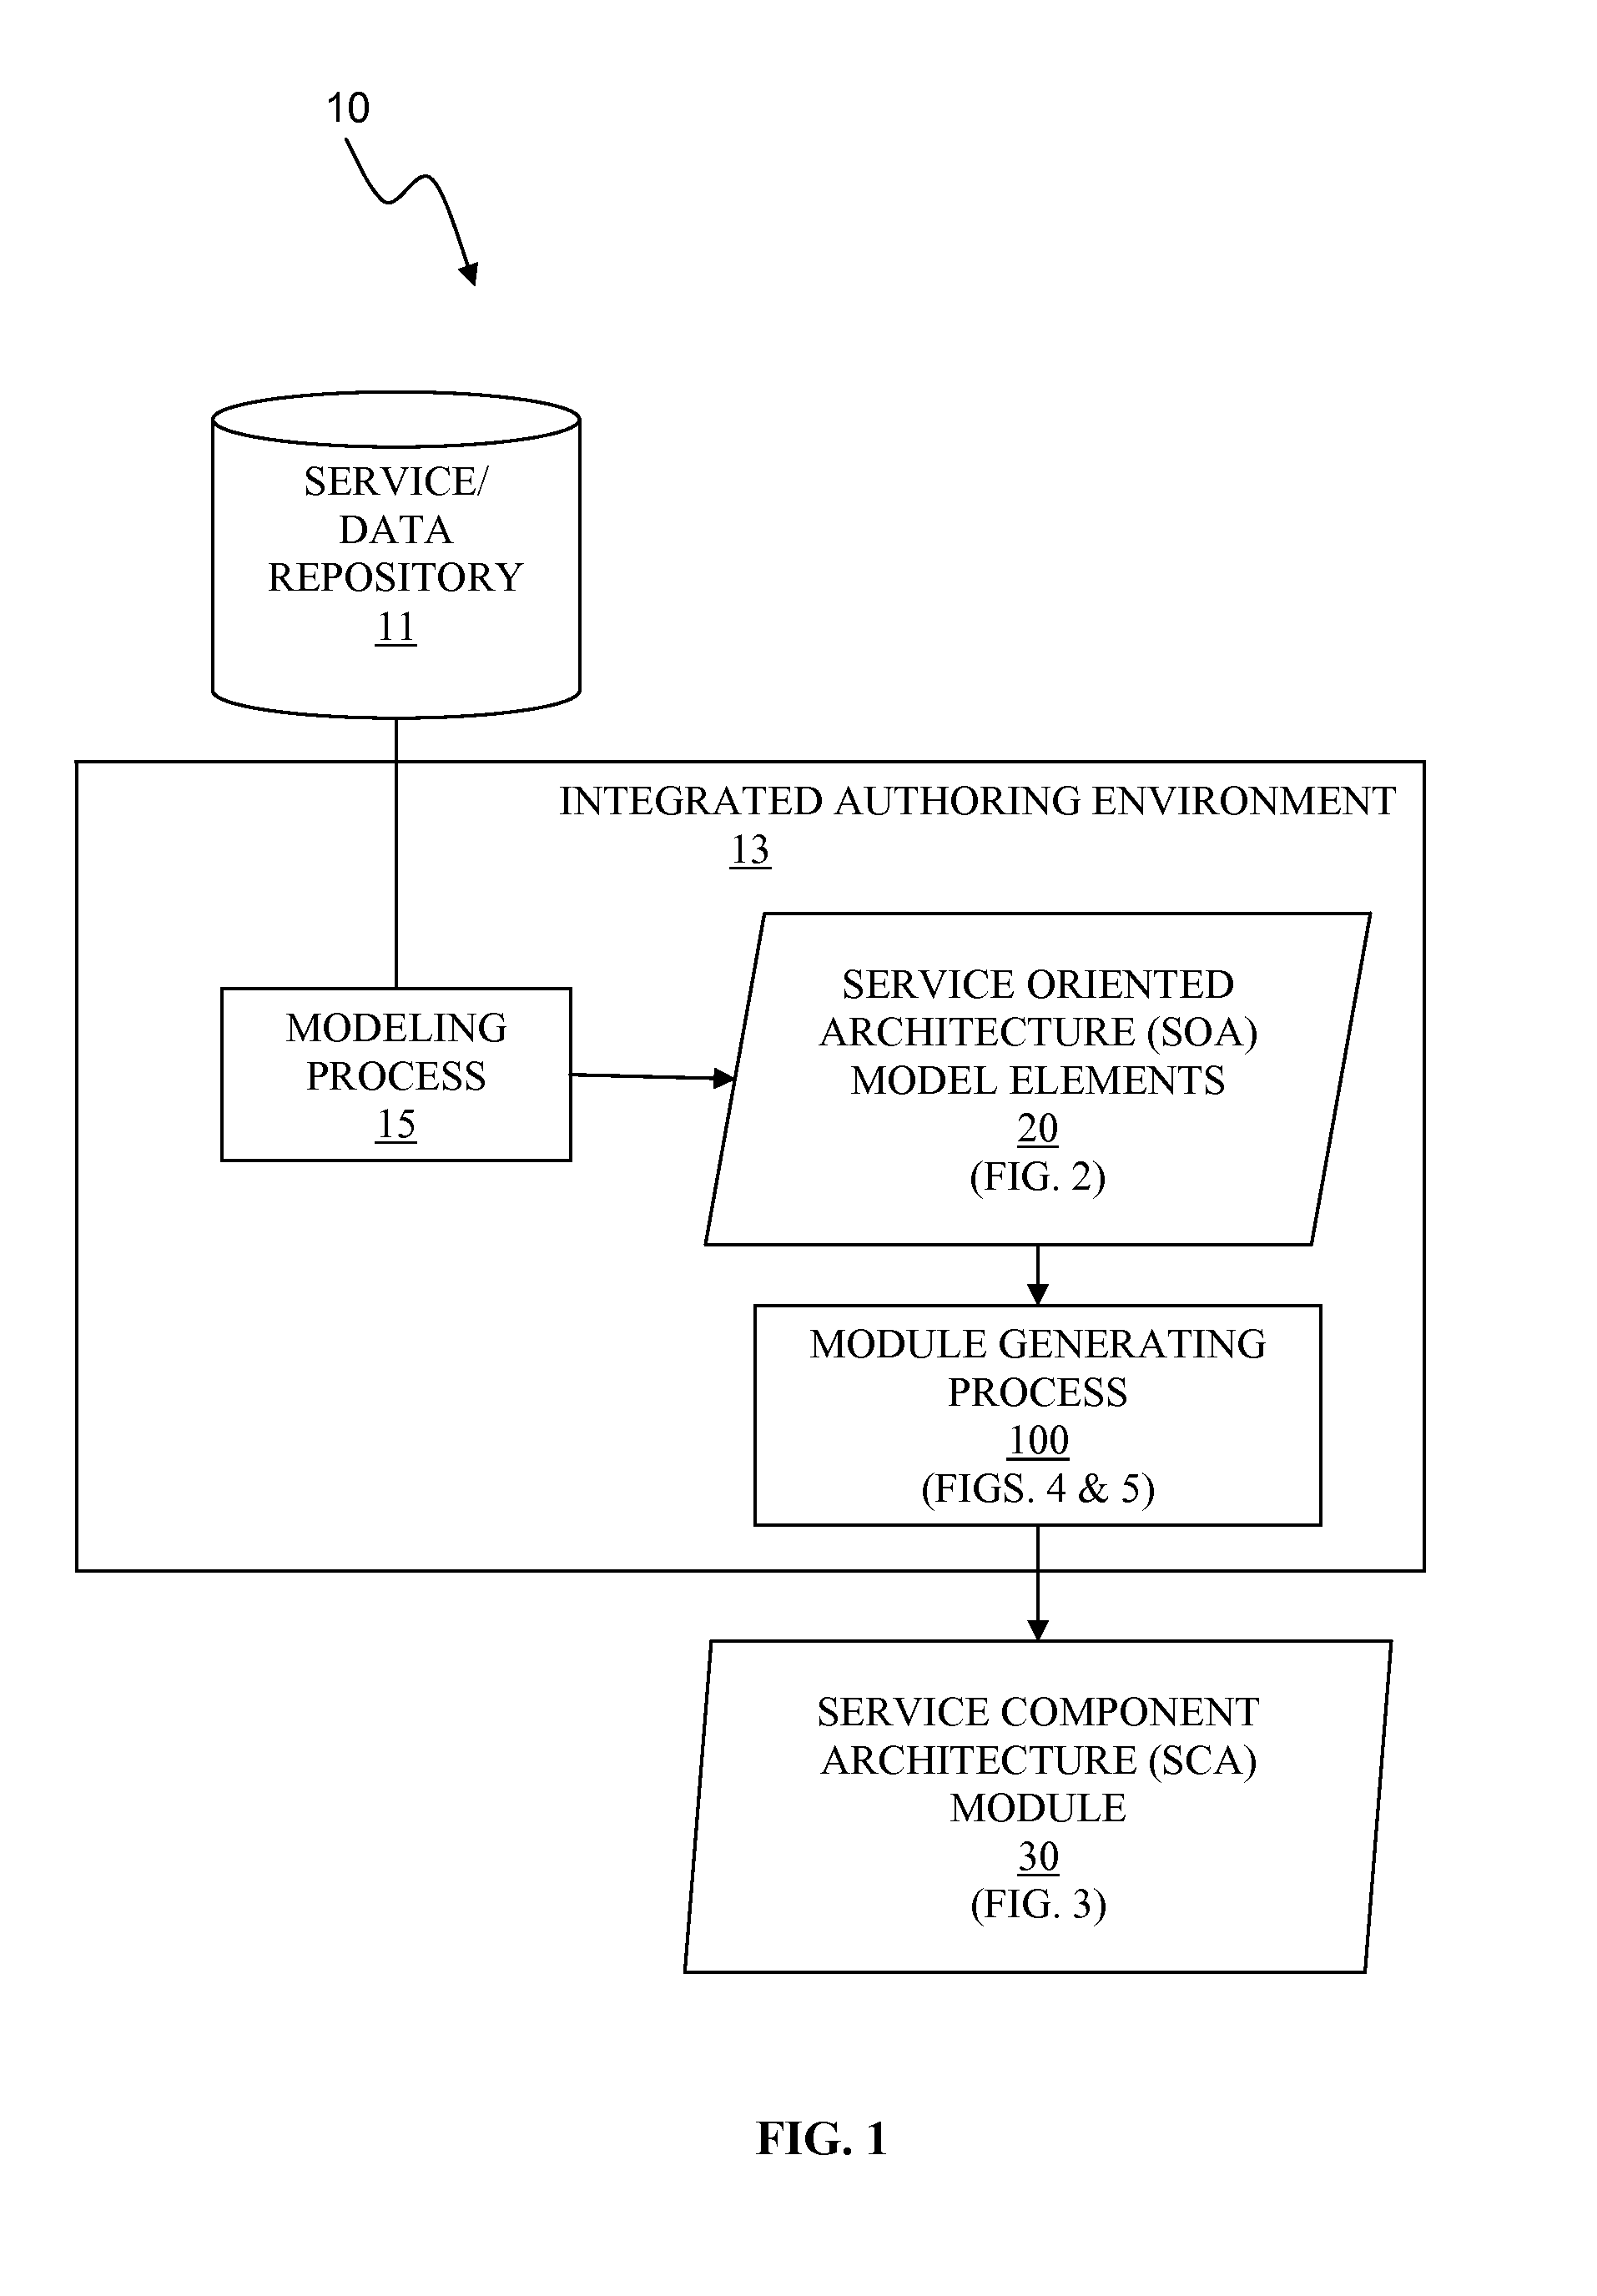 Generating a service component architecture (SCA) module with service oriented architecture (SOA) model elements